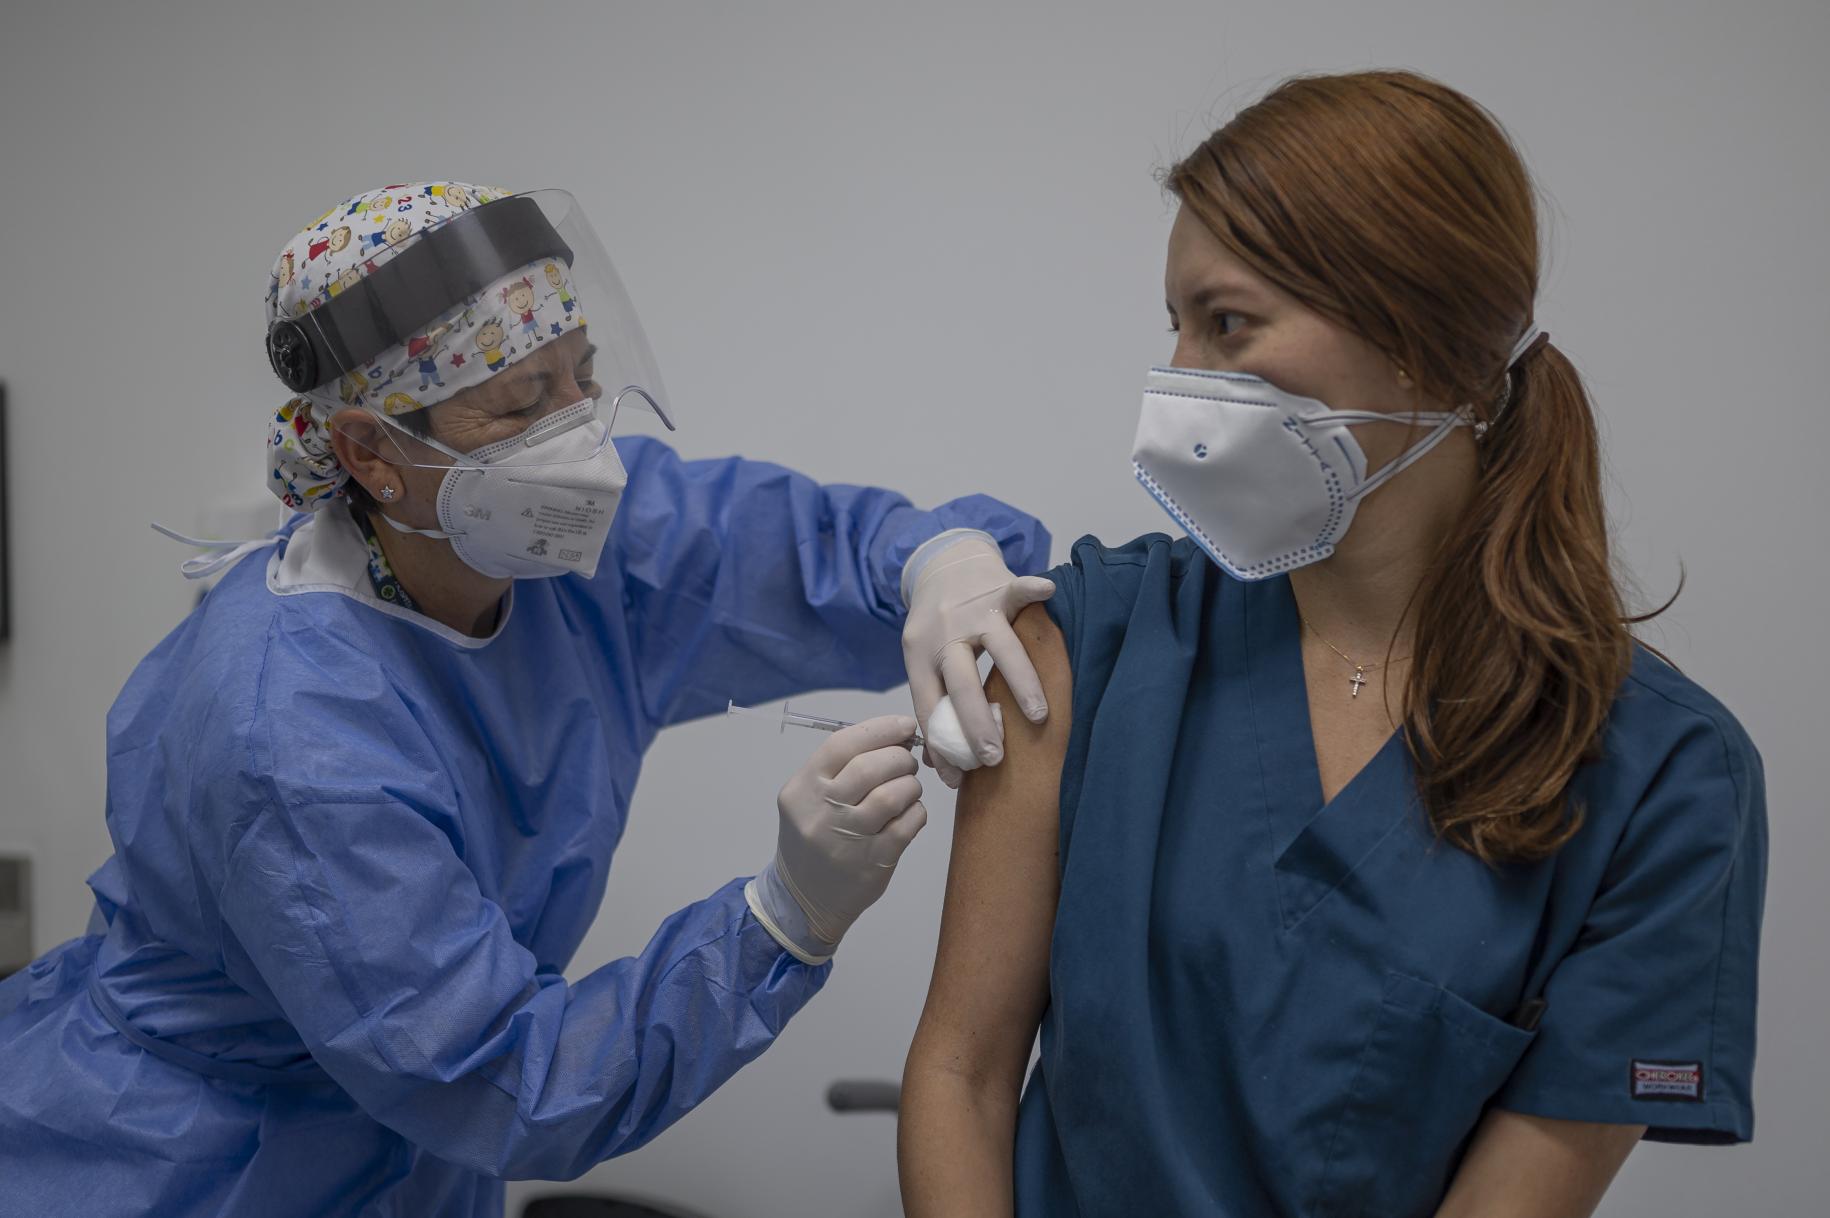 A healthcare professional wearing full head-to-toe protective gear is shown vaccinating a female colleague. 